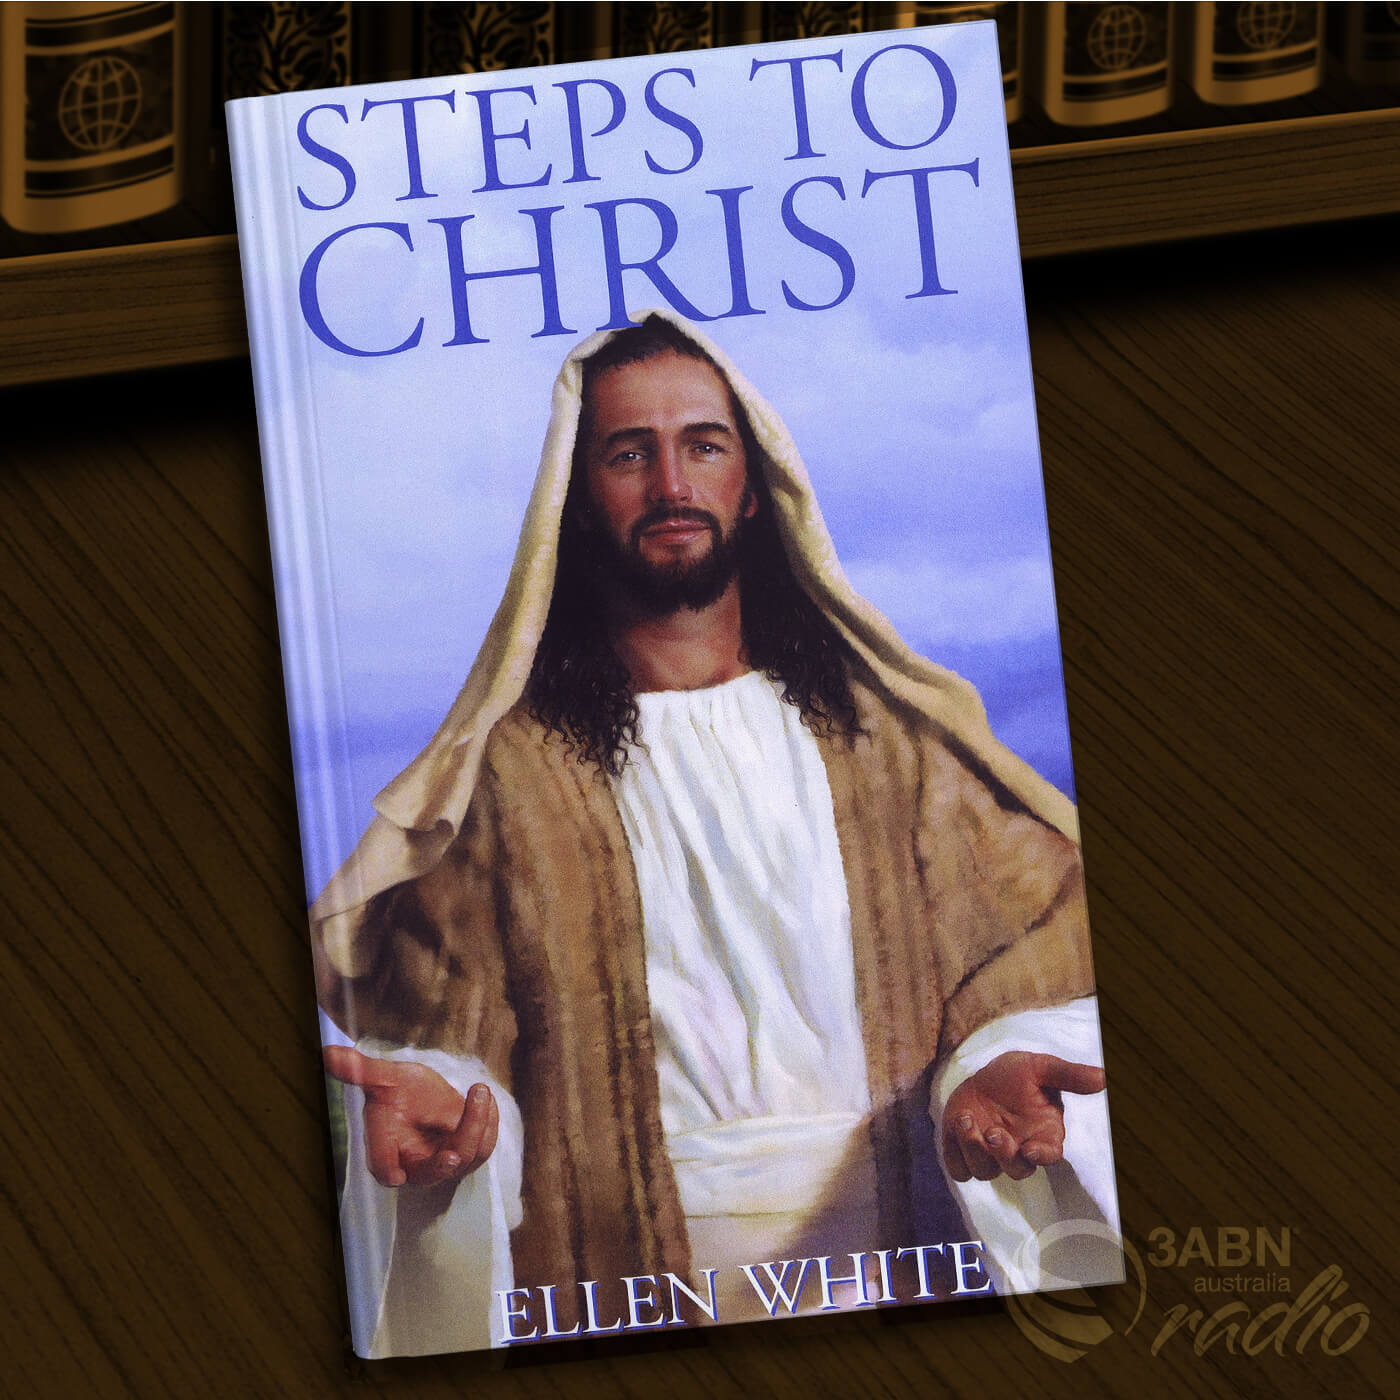 Chapter 2 - The Sinner's Need of Christ